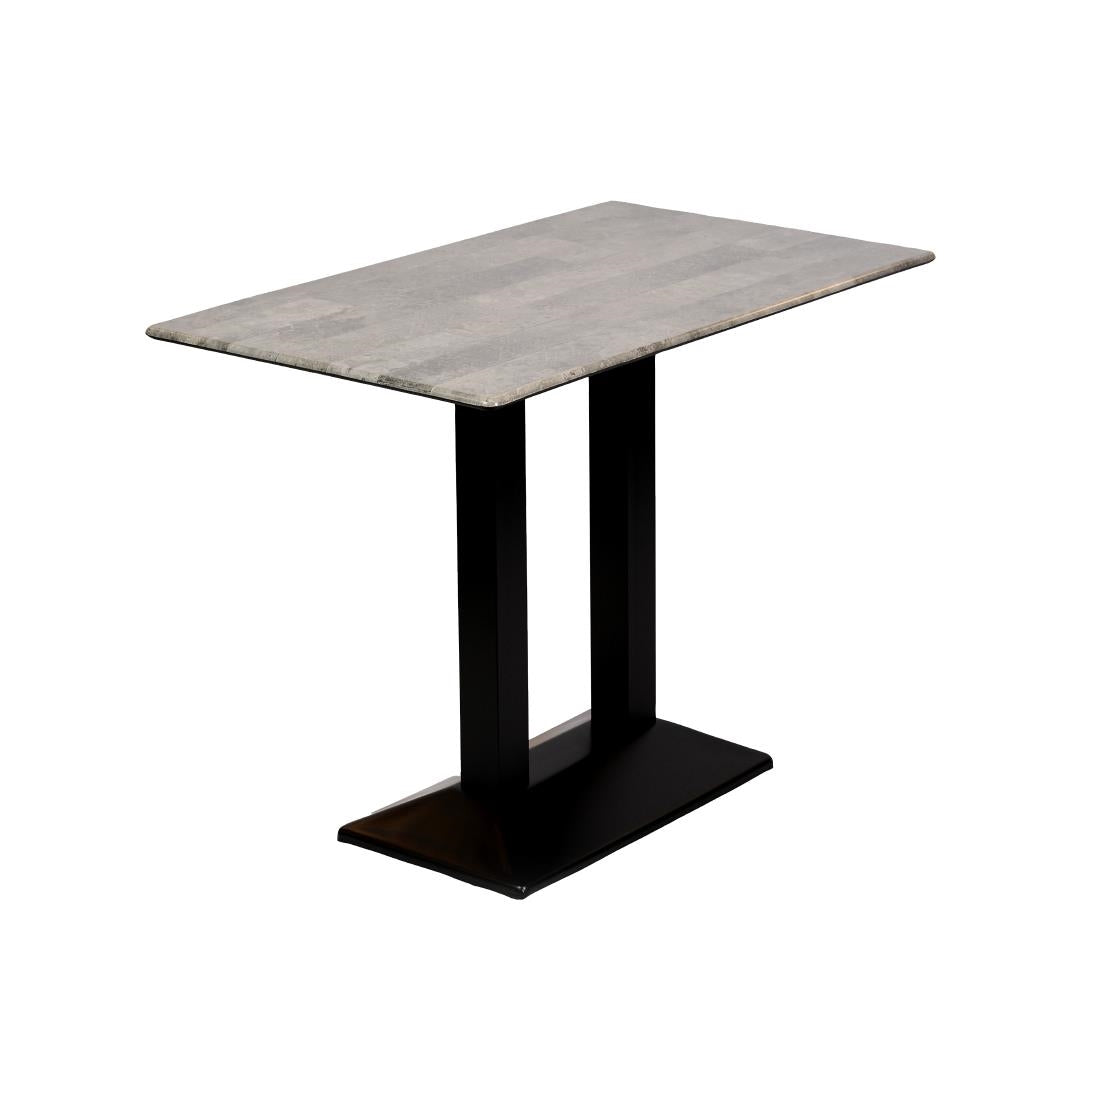 CZ839 Turin Metal Base Rectangular Poseur Table with Laminate Top Concrete 1200x700mm JD Catering Equipment Solutions Ltd